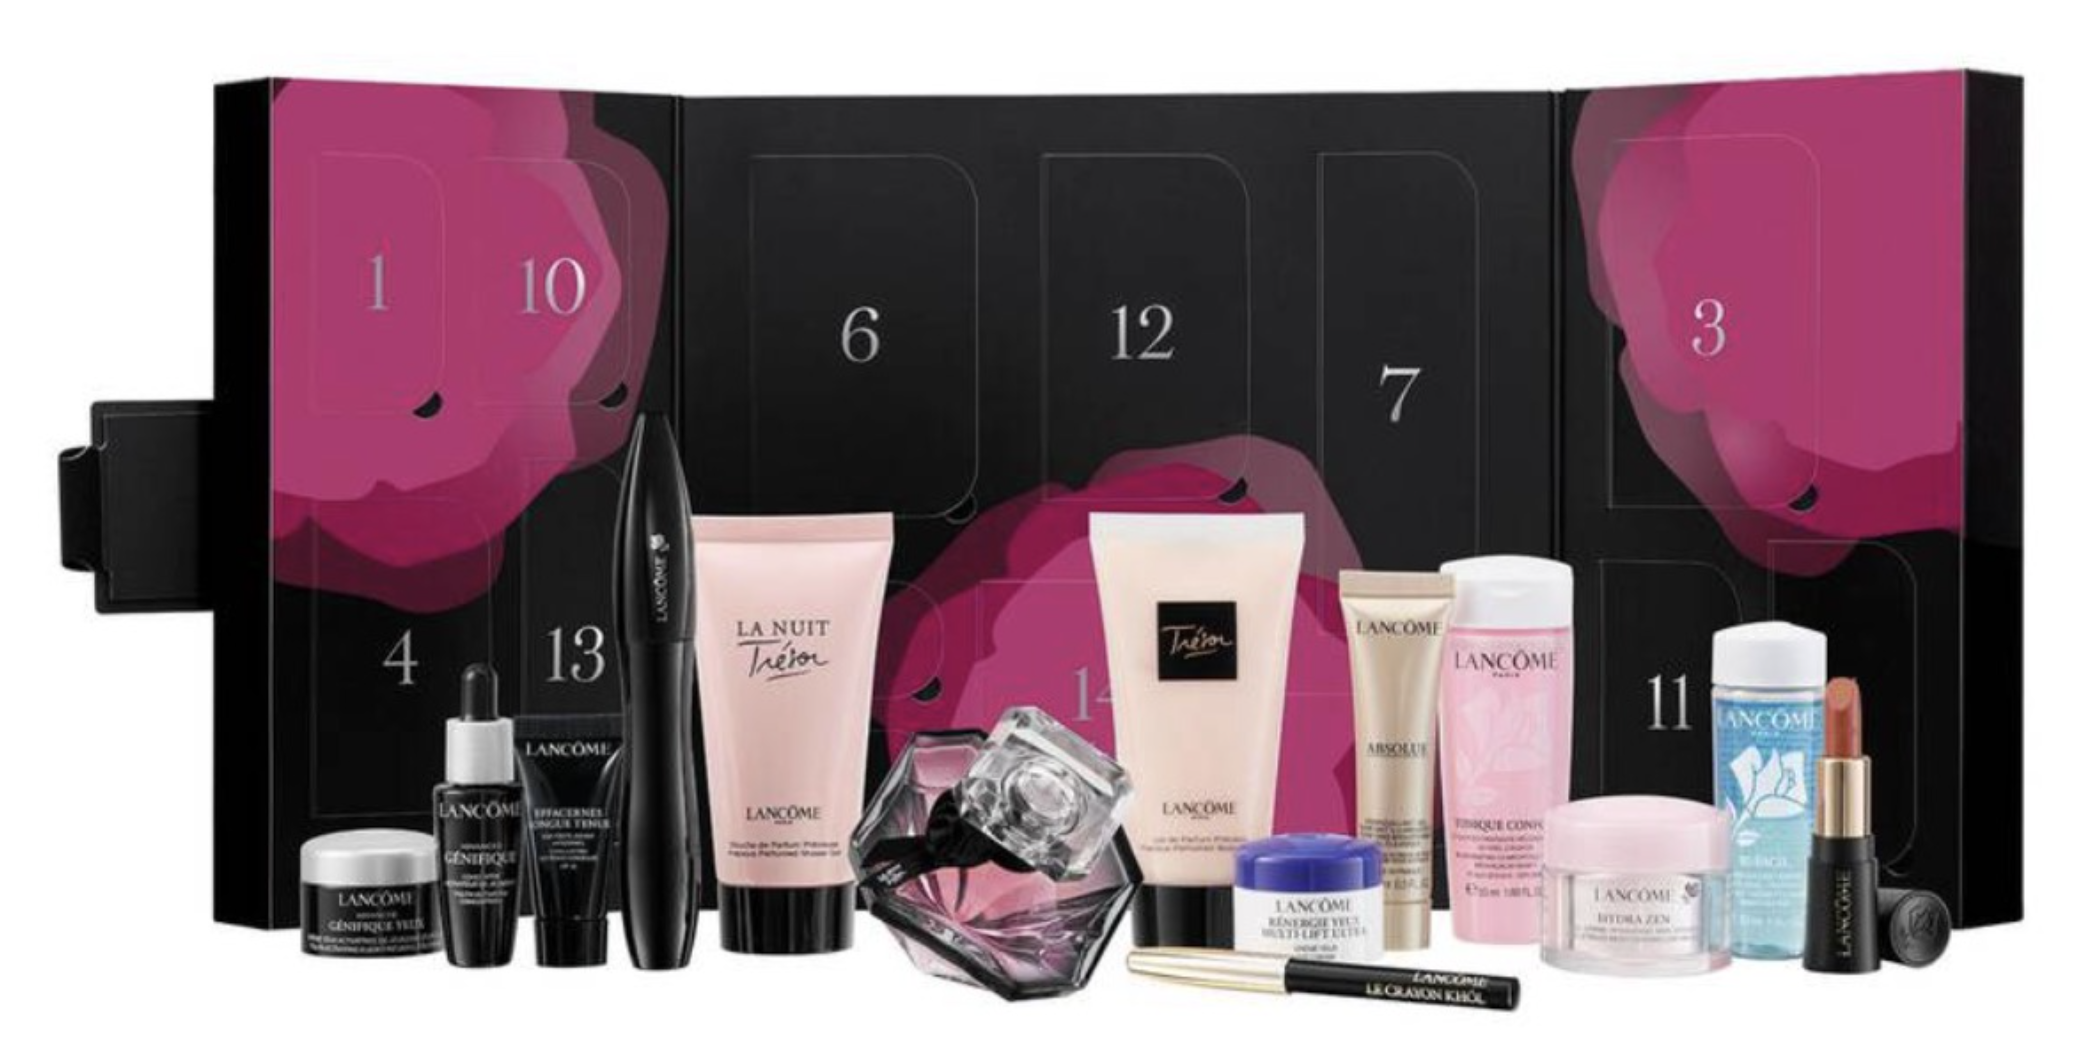 Lancome's Valentine's Day advent calendar as part of the company's Valentine's Day marketing campaign.